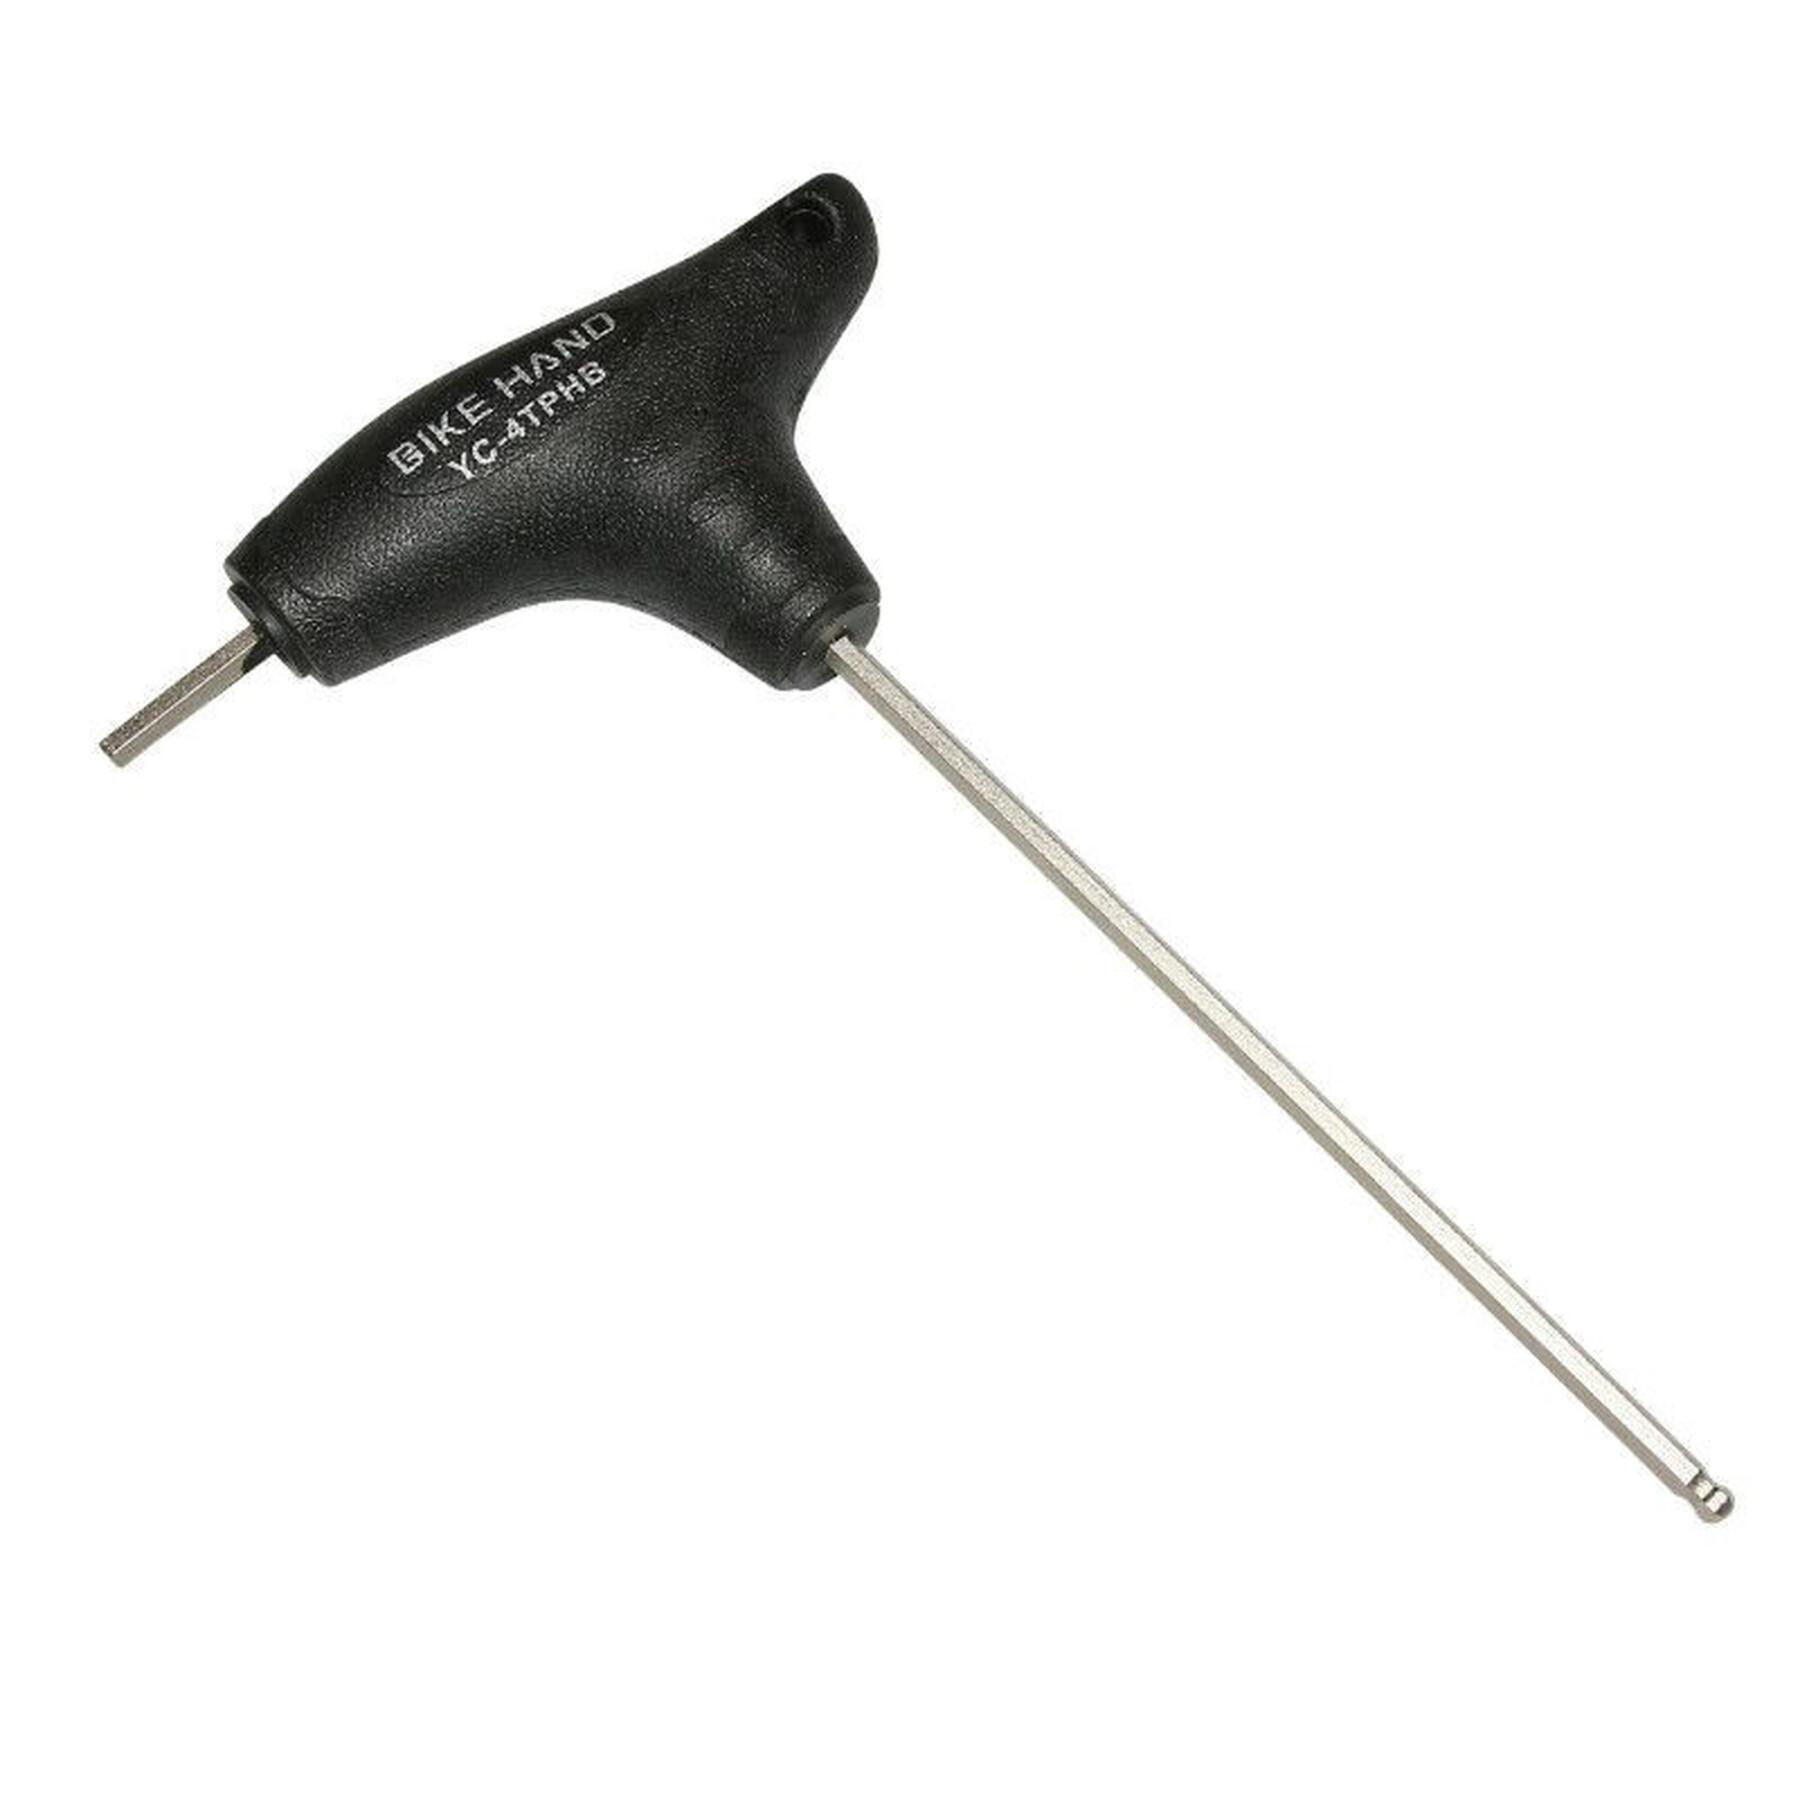 Allen key tool with handle P2R 4 mm